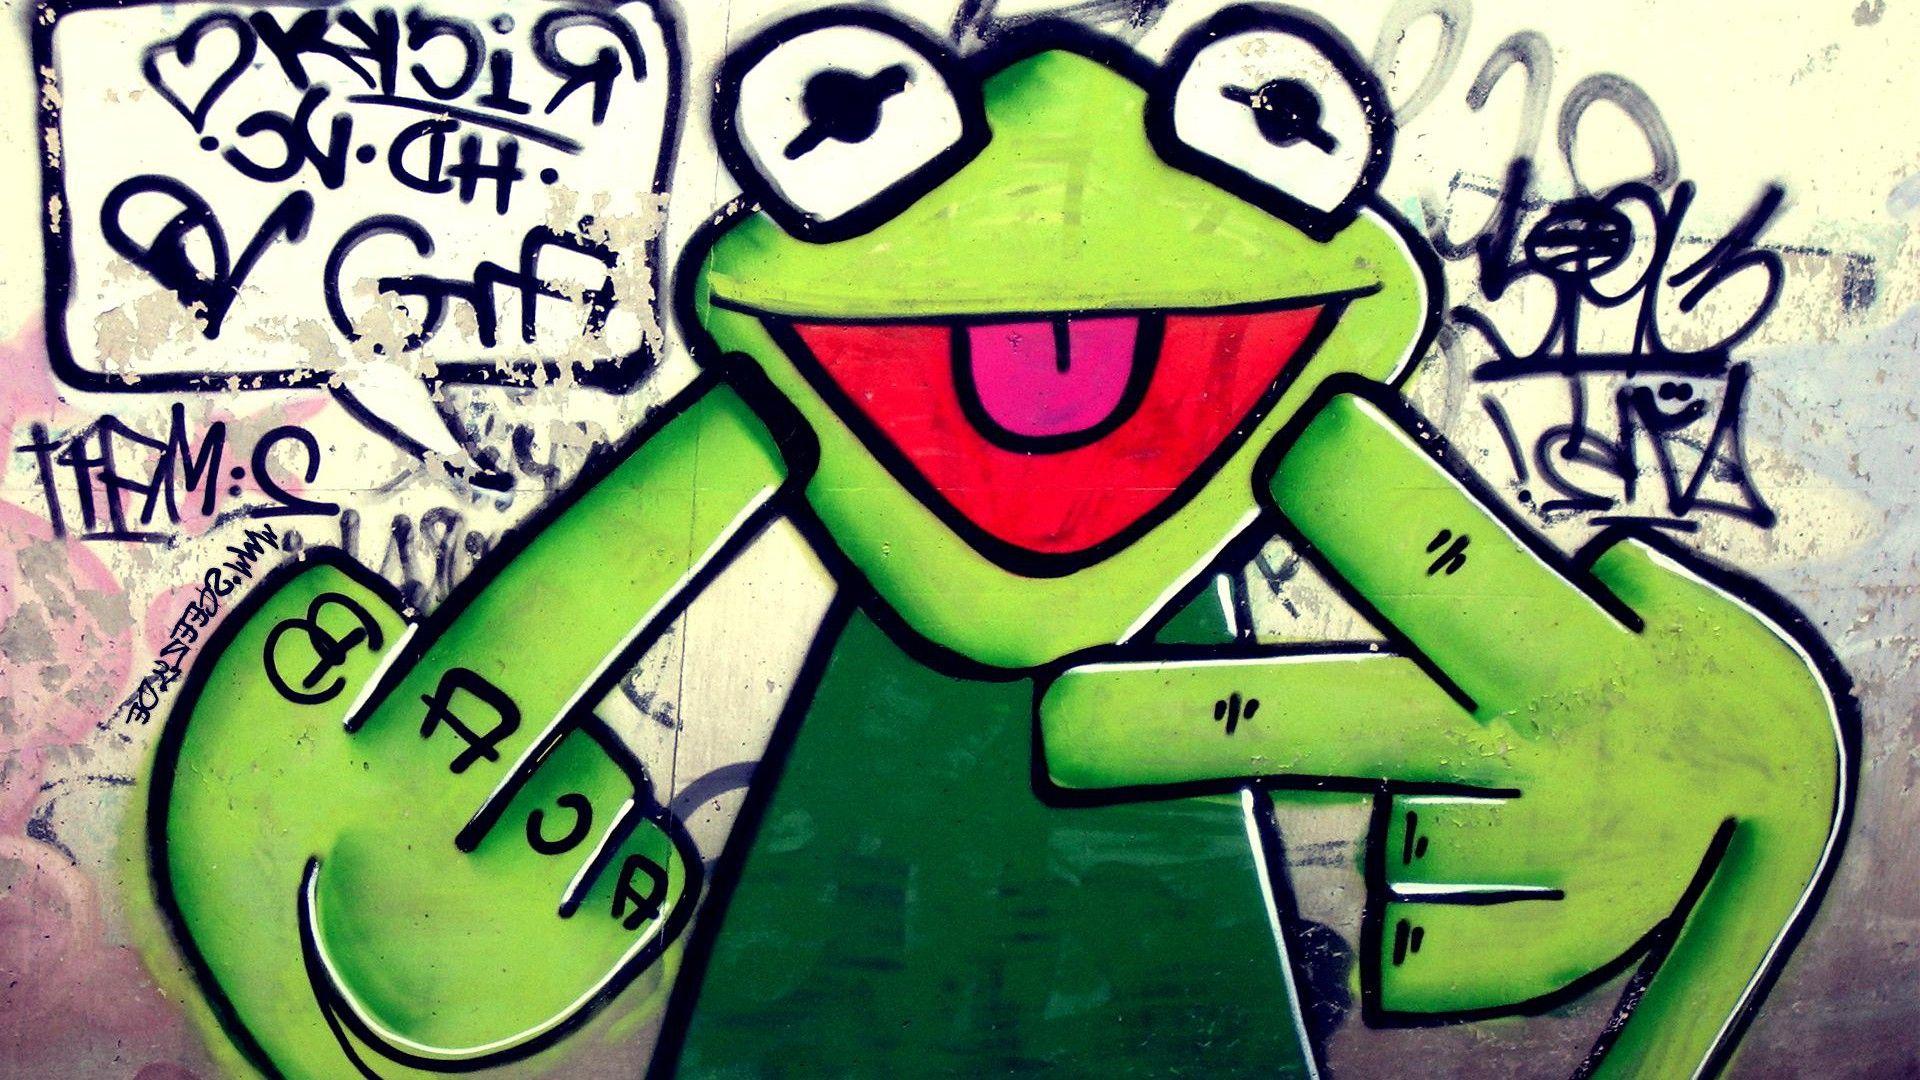 Gangster Words With Z Art Wallpapers Artistic Frog Graffiti Wallpapers